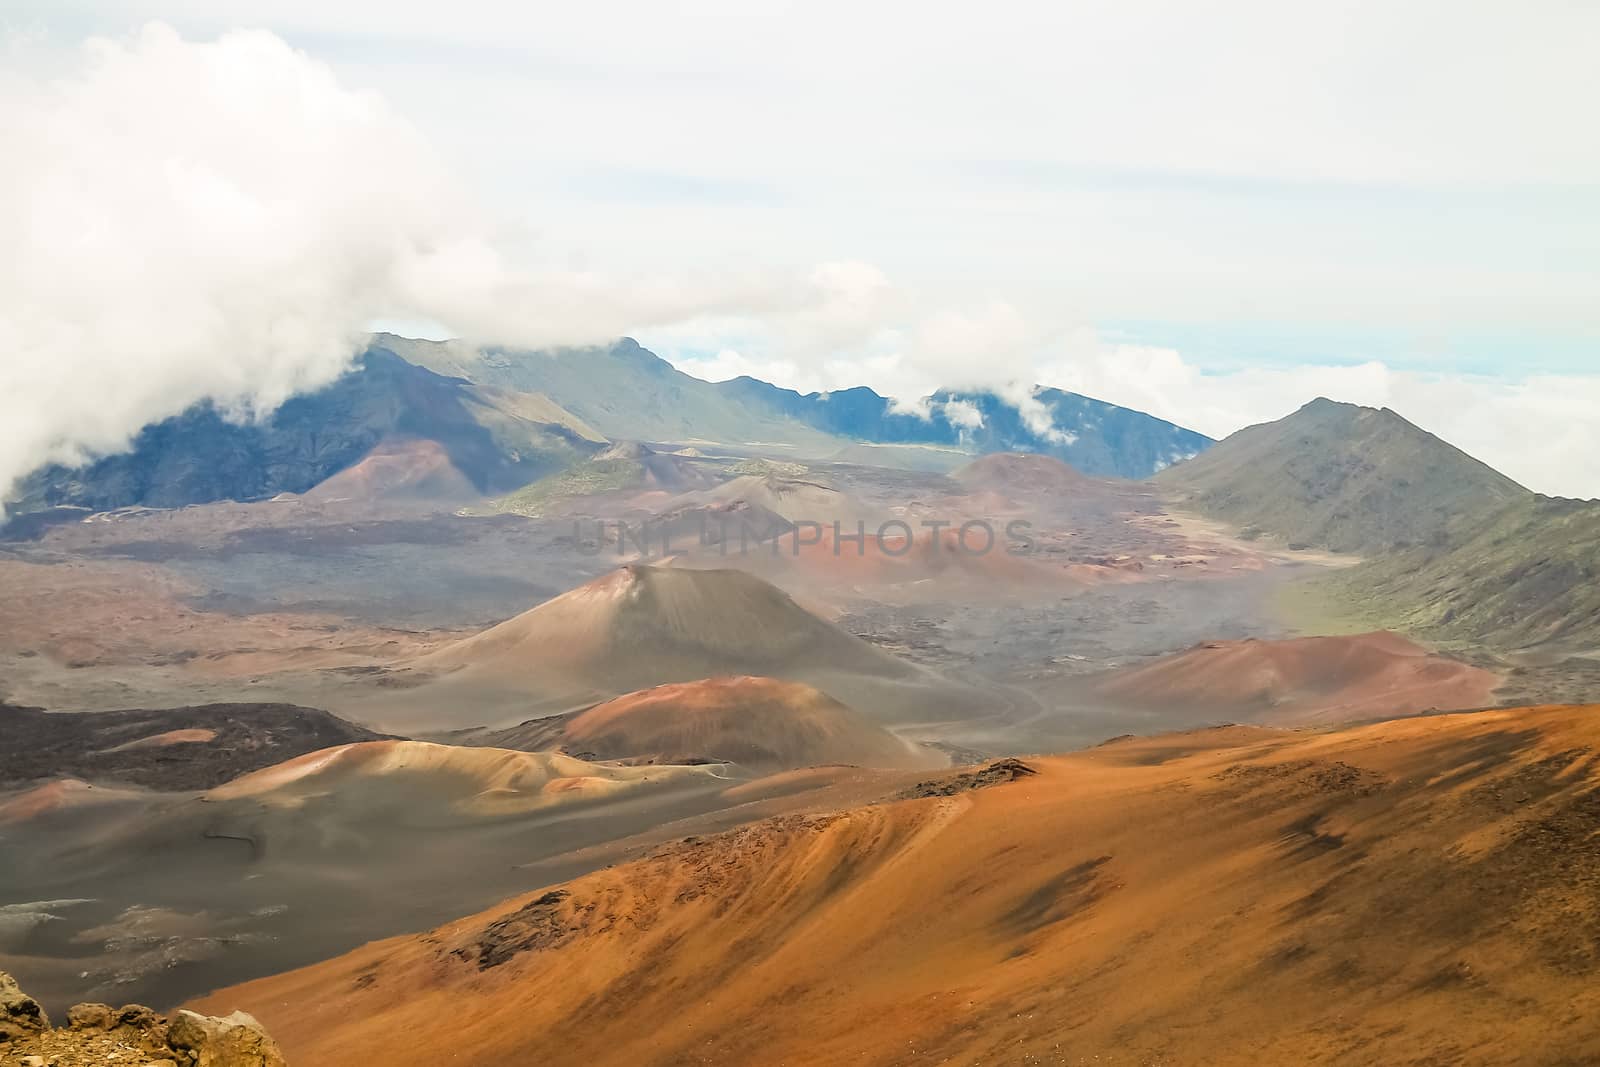 Beautiful daytime view of the Mount Haleakala crater in Maui, Hawaii